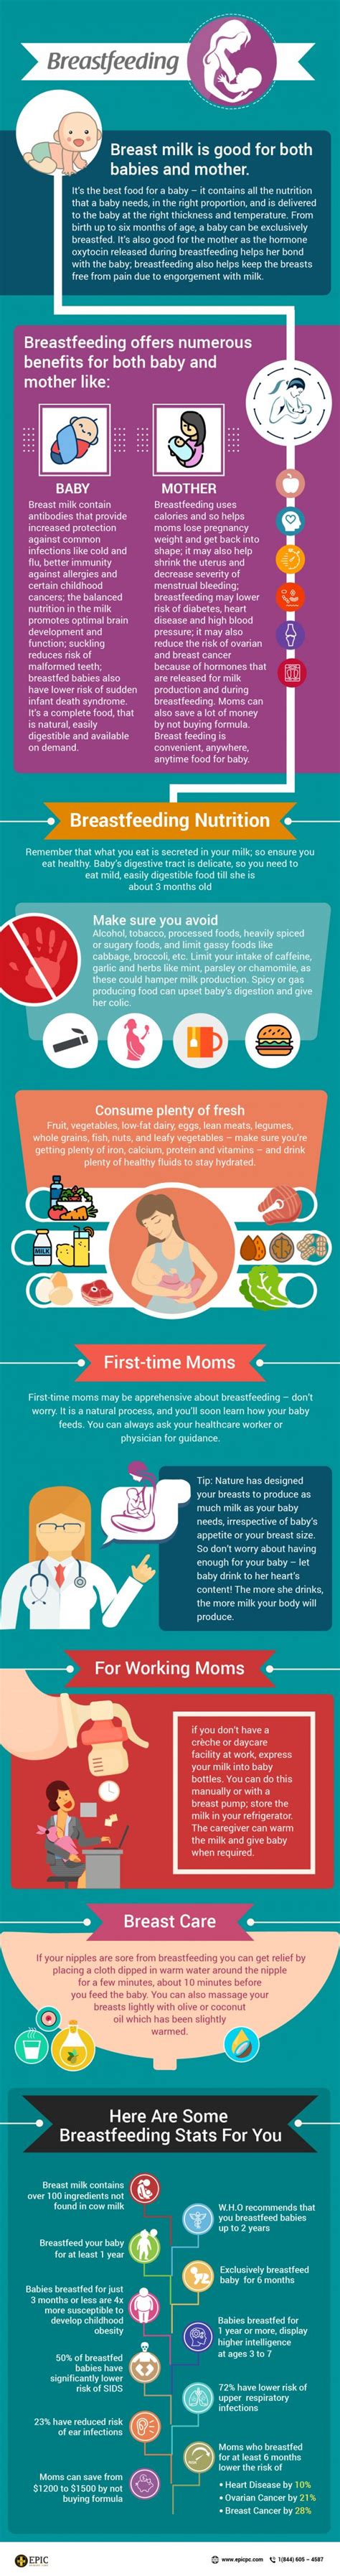 Breastfeeding Infographic Epic ~ Exclusive Physicians Integrated